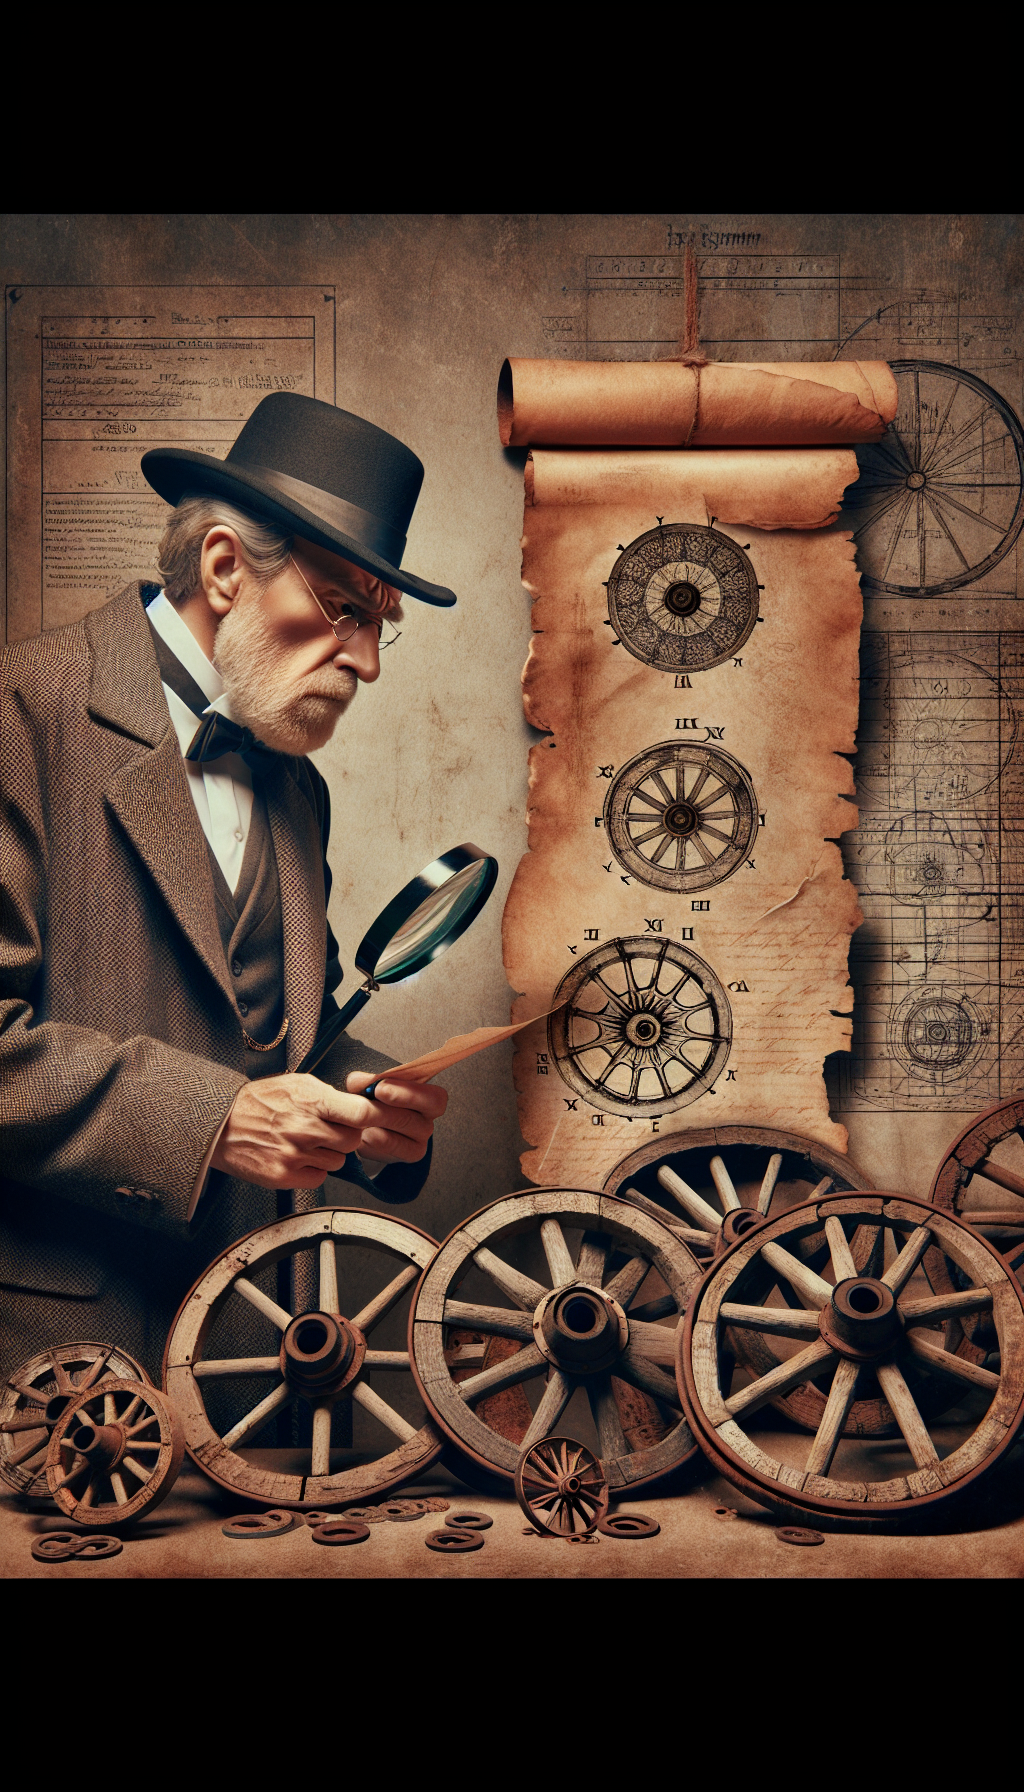 An old-fashioned detective in Victorian attire examines a lineup of antique wagon wheels with a magnifying glass, each wheel leaving a unique trail pattern on a dusty ground below. A scroll unfurls beside him bearing the marks "XVIII," "XIX," and "XX," symbolizing the centuries, while faded blueprints and maps adorn the background to allude to their origins.